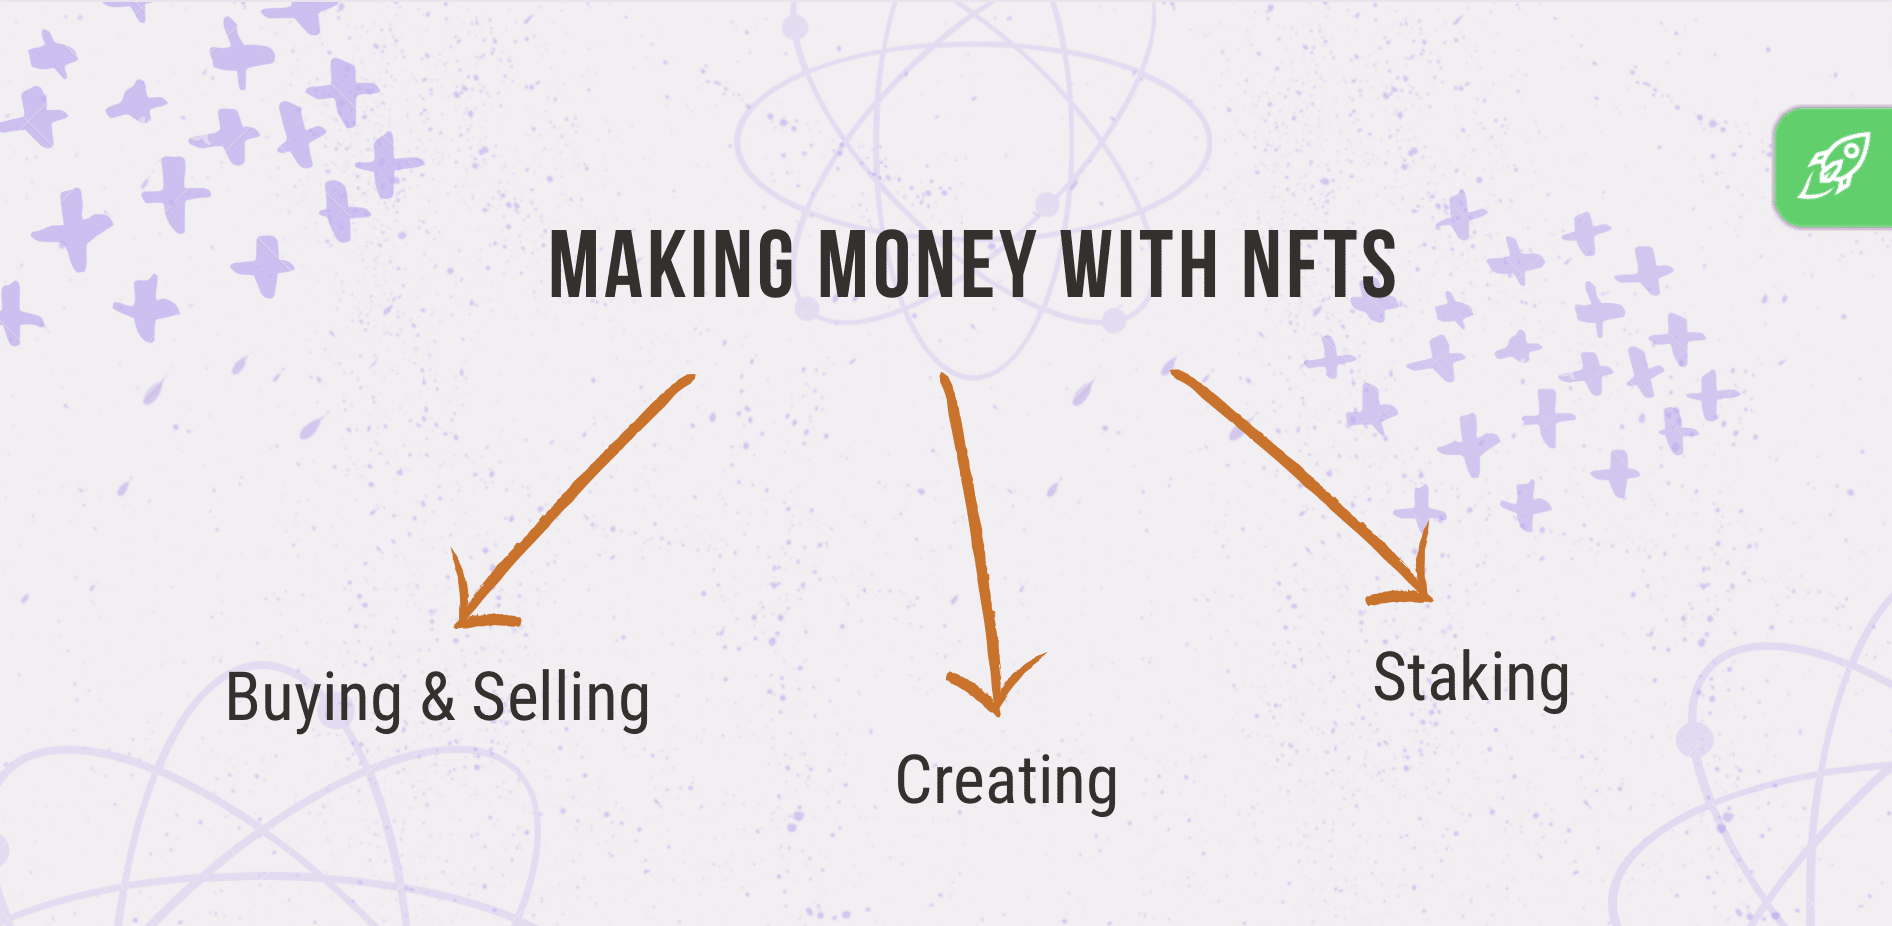 How to make money from NFTs; three main ways (trading, creating, and staking)